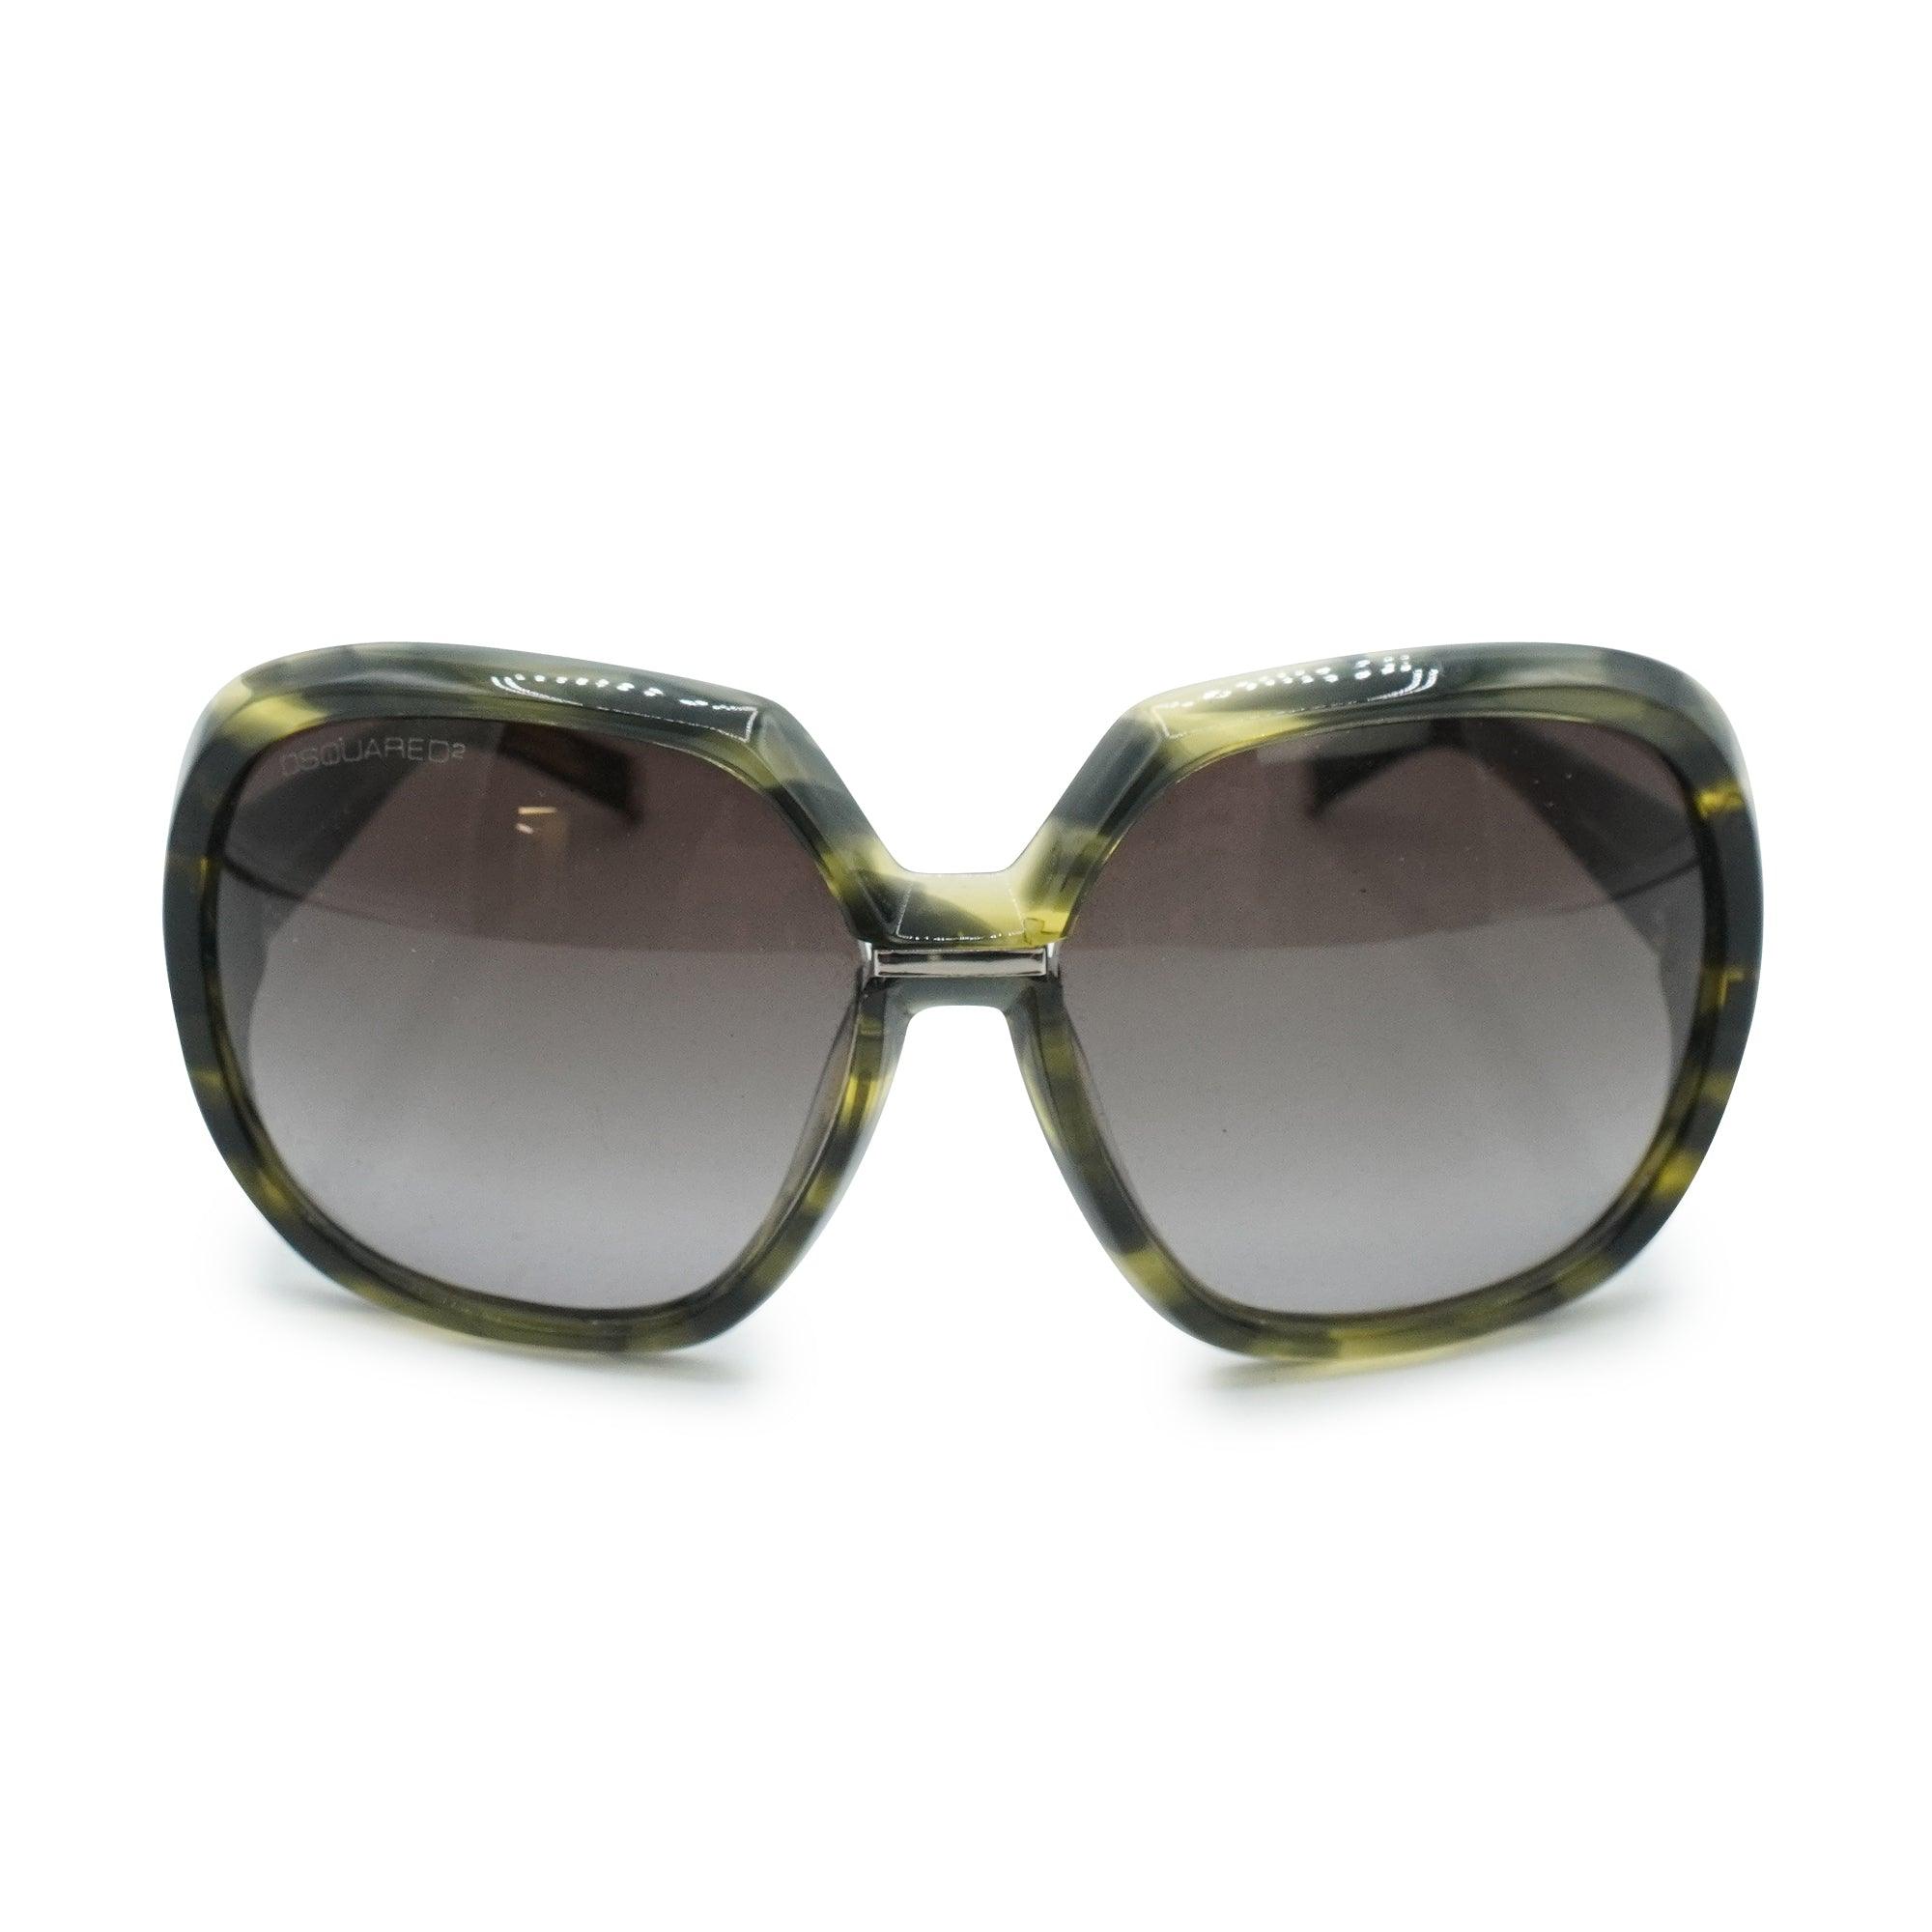 Dsquared2 Sunglasses - Fashionably Yours